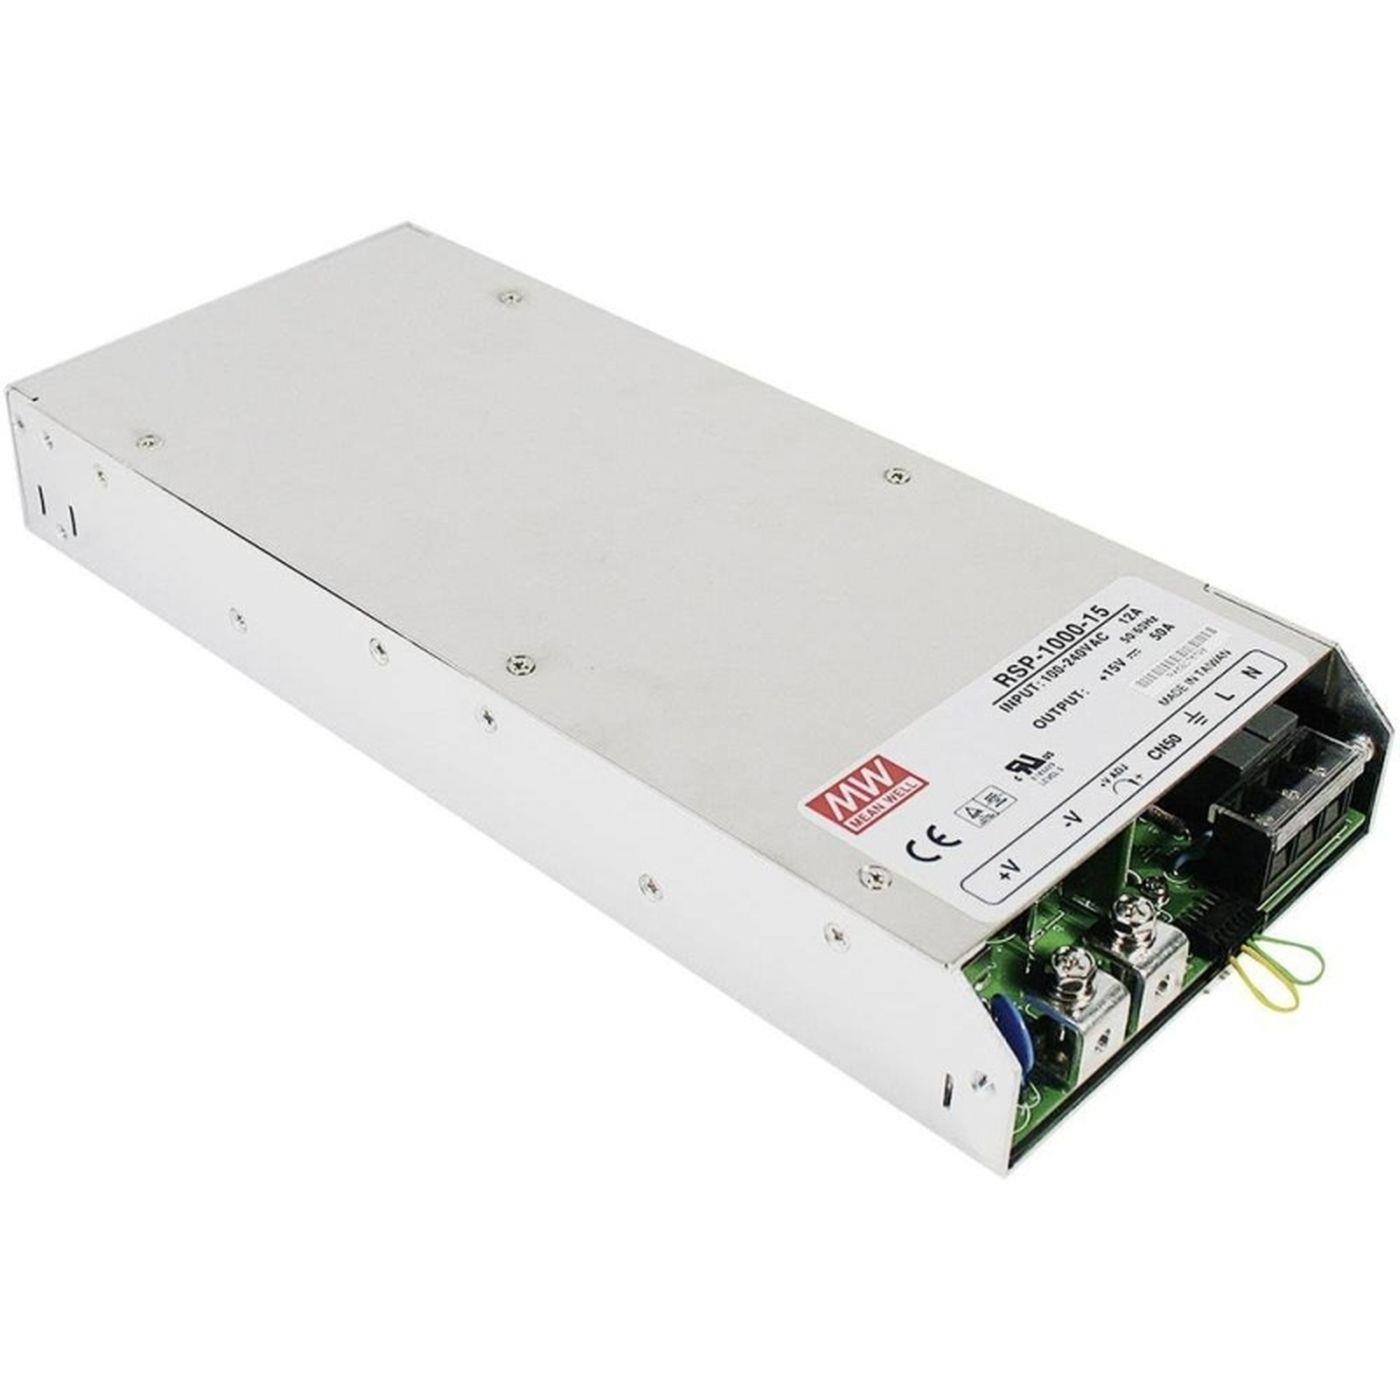 RSP-1000-27 1000W 27V 37A Industrial power supply